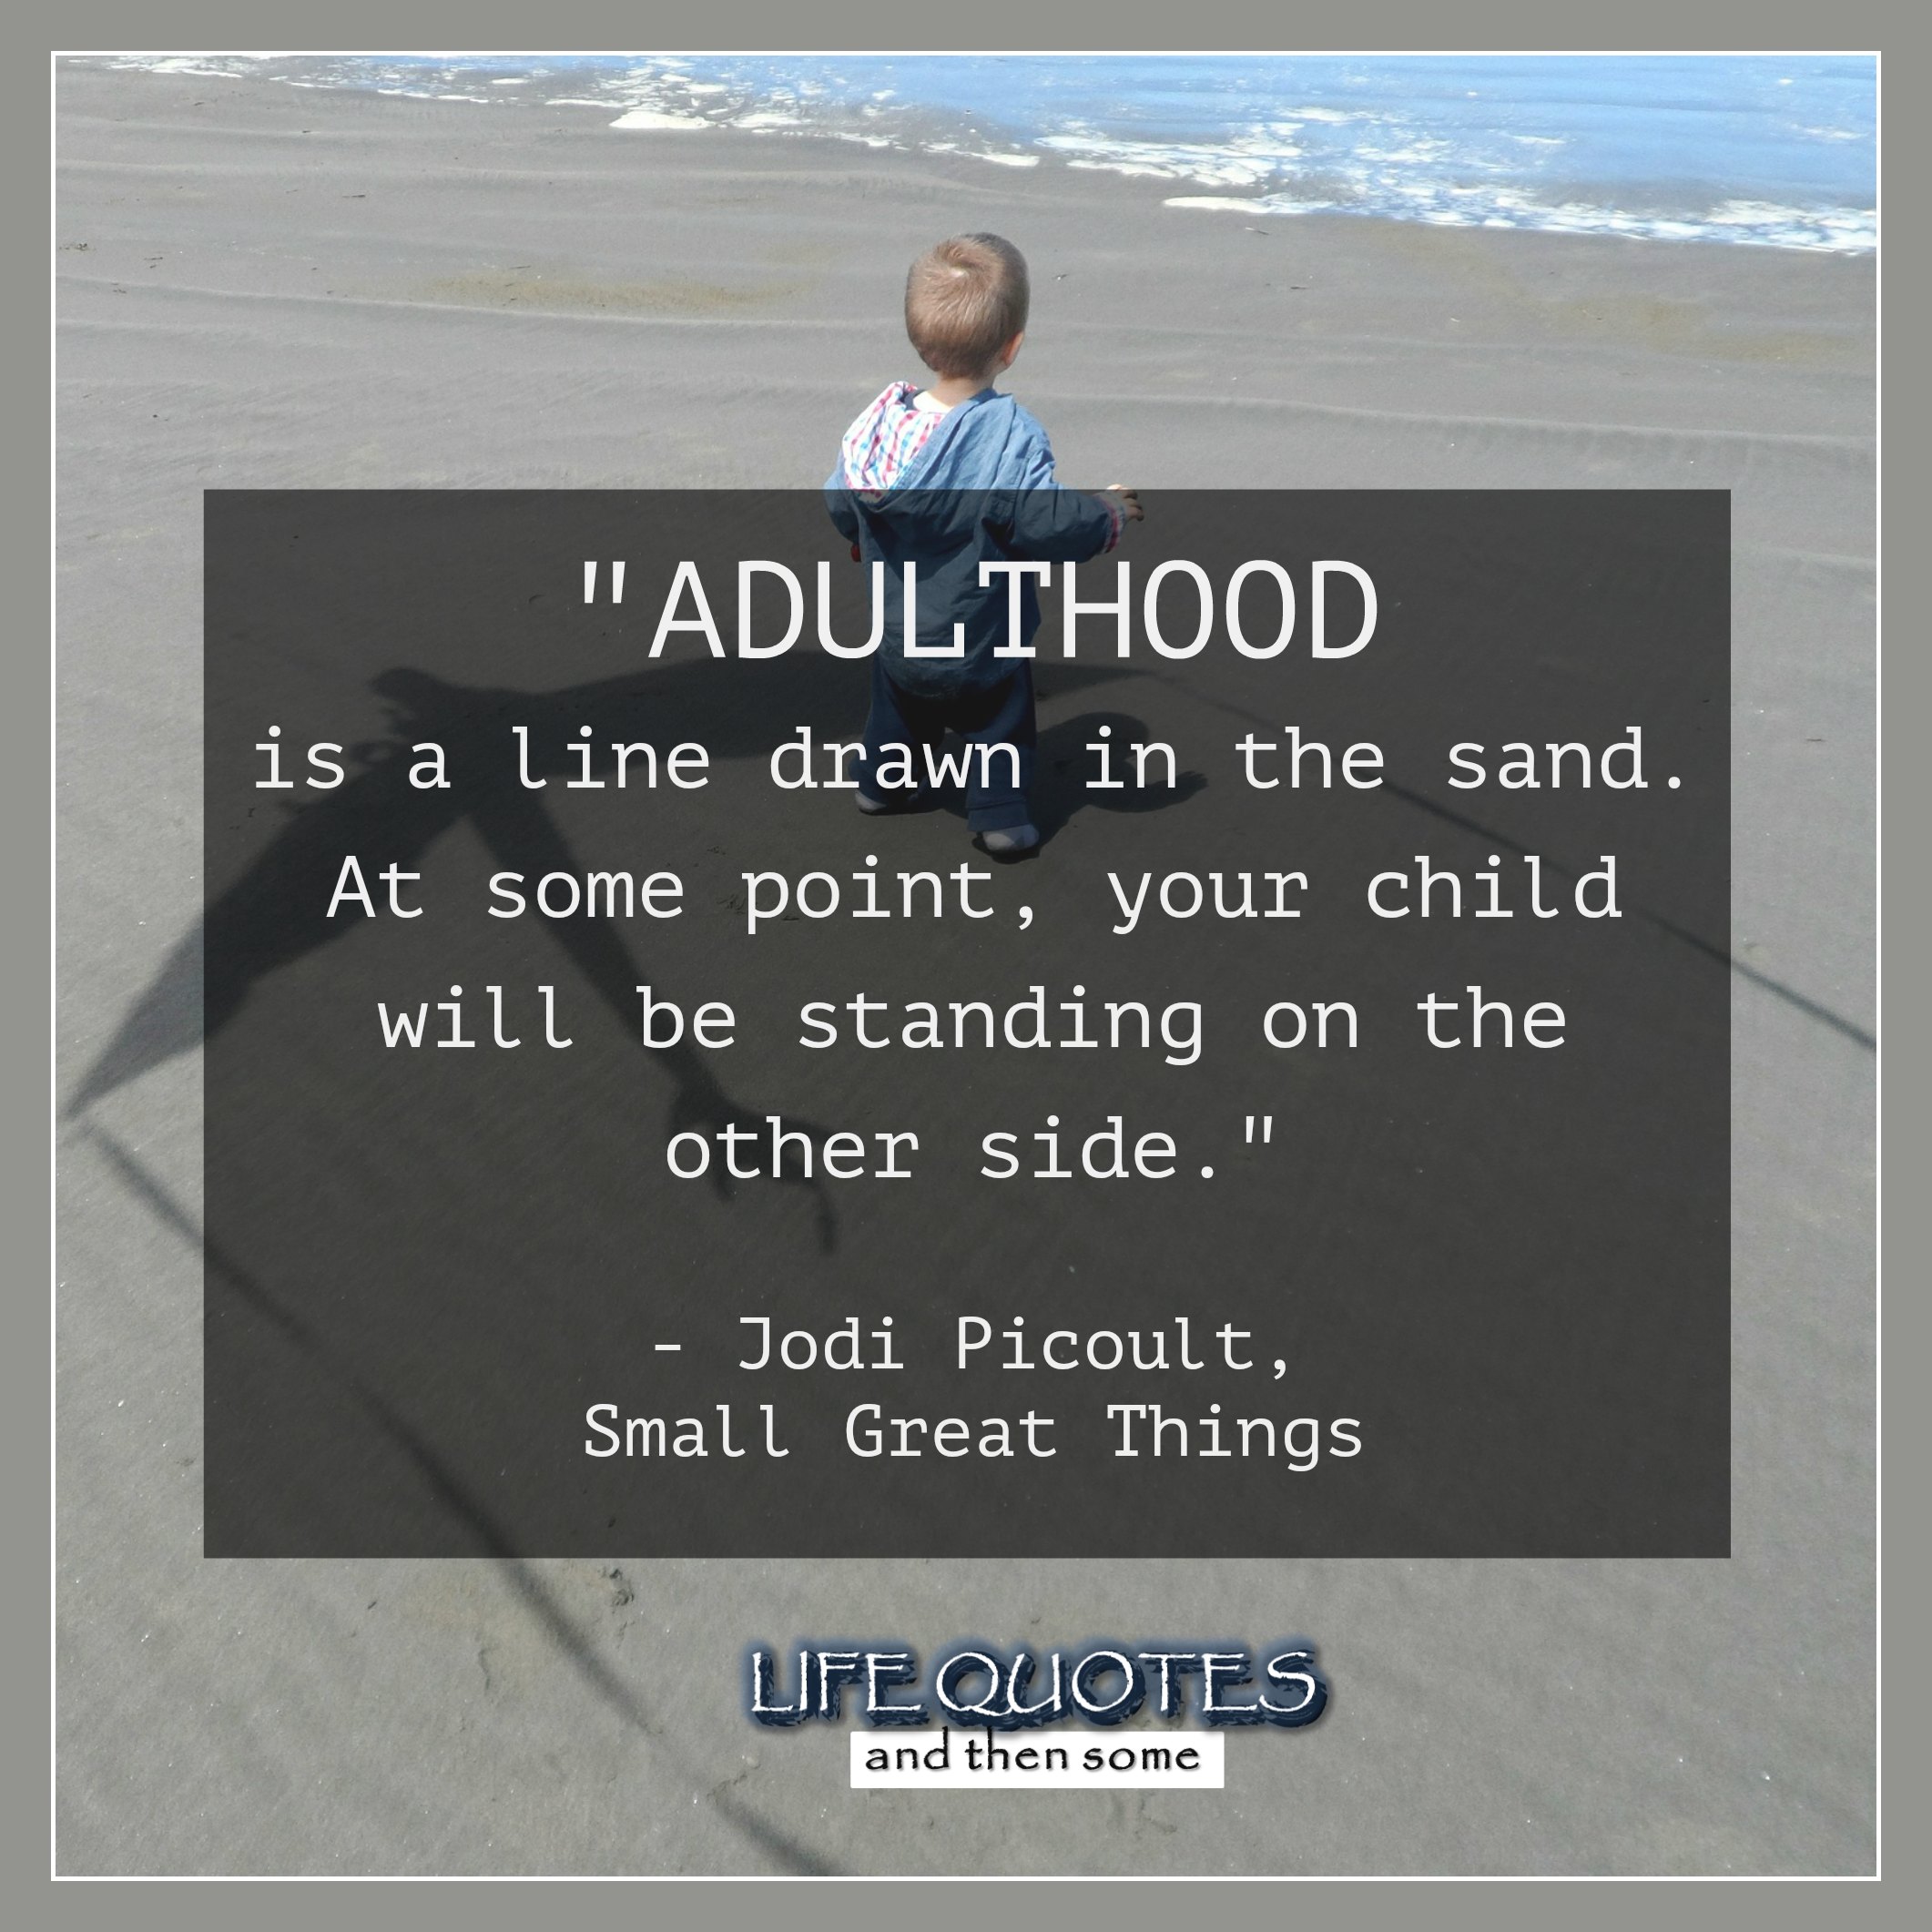 Adulthood Quote By Jodi Picoult Life Quotes And Then Some